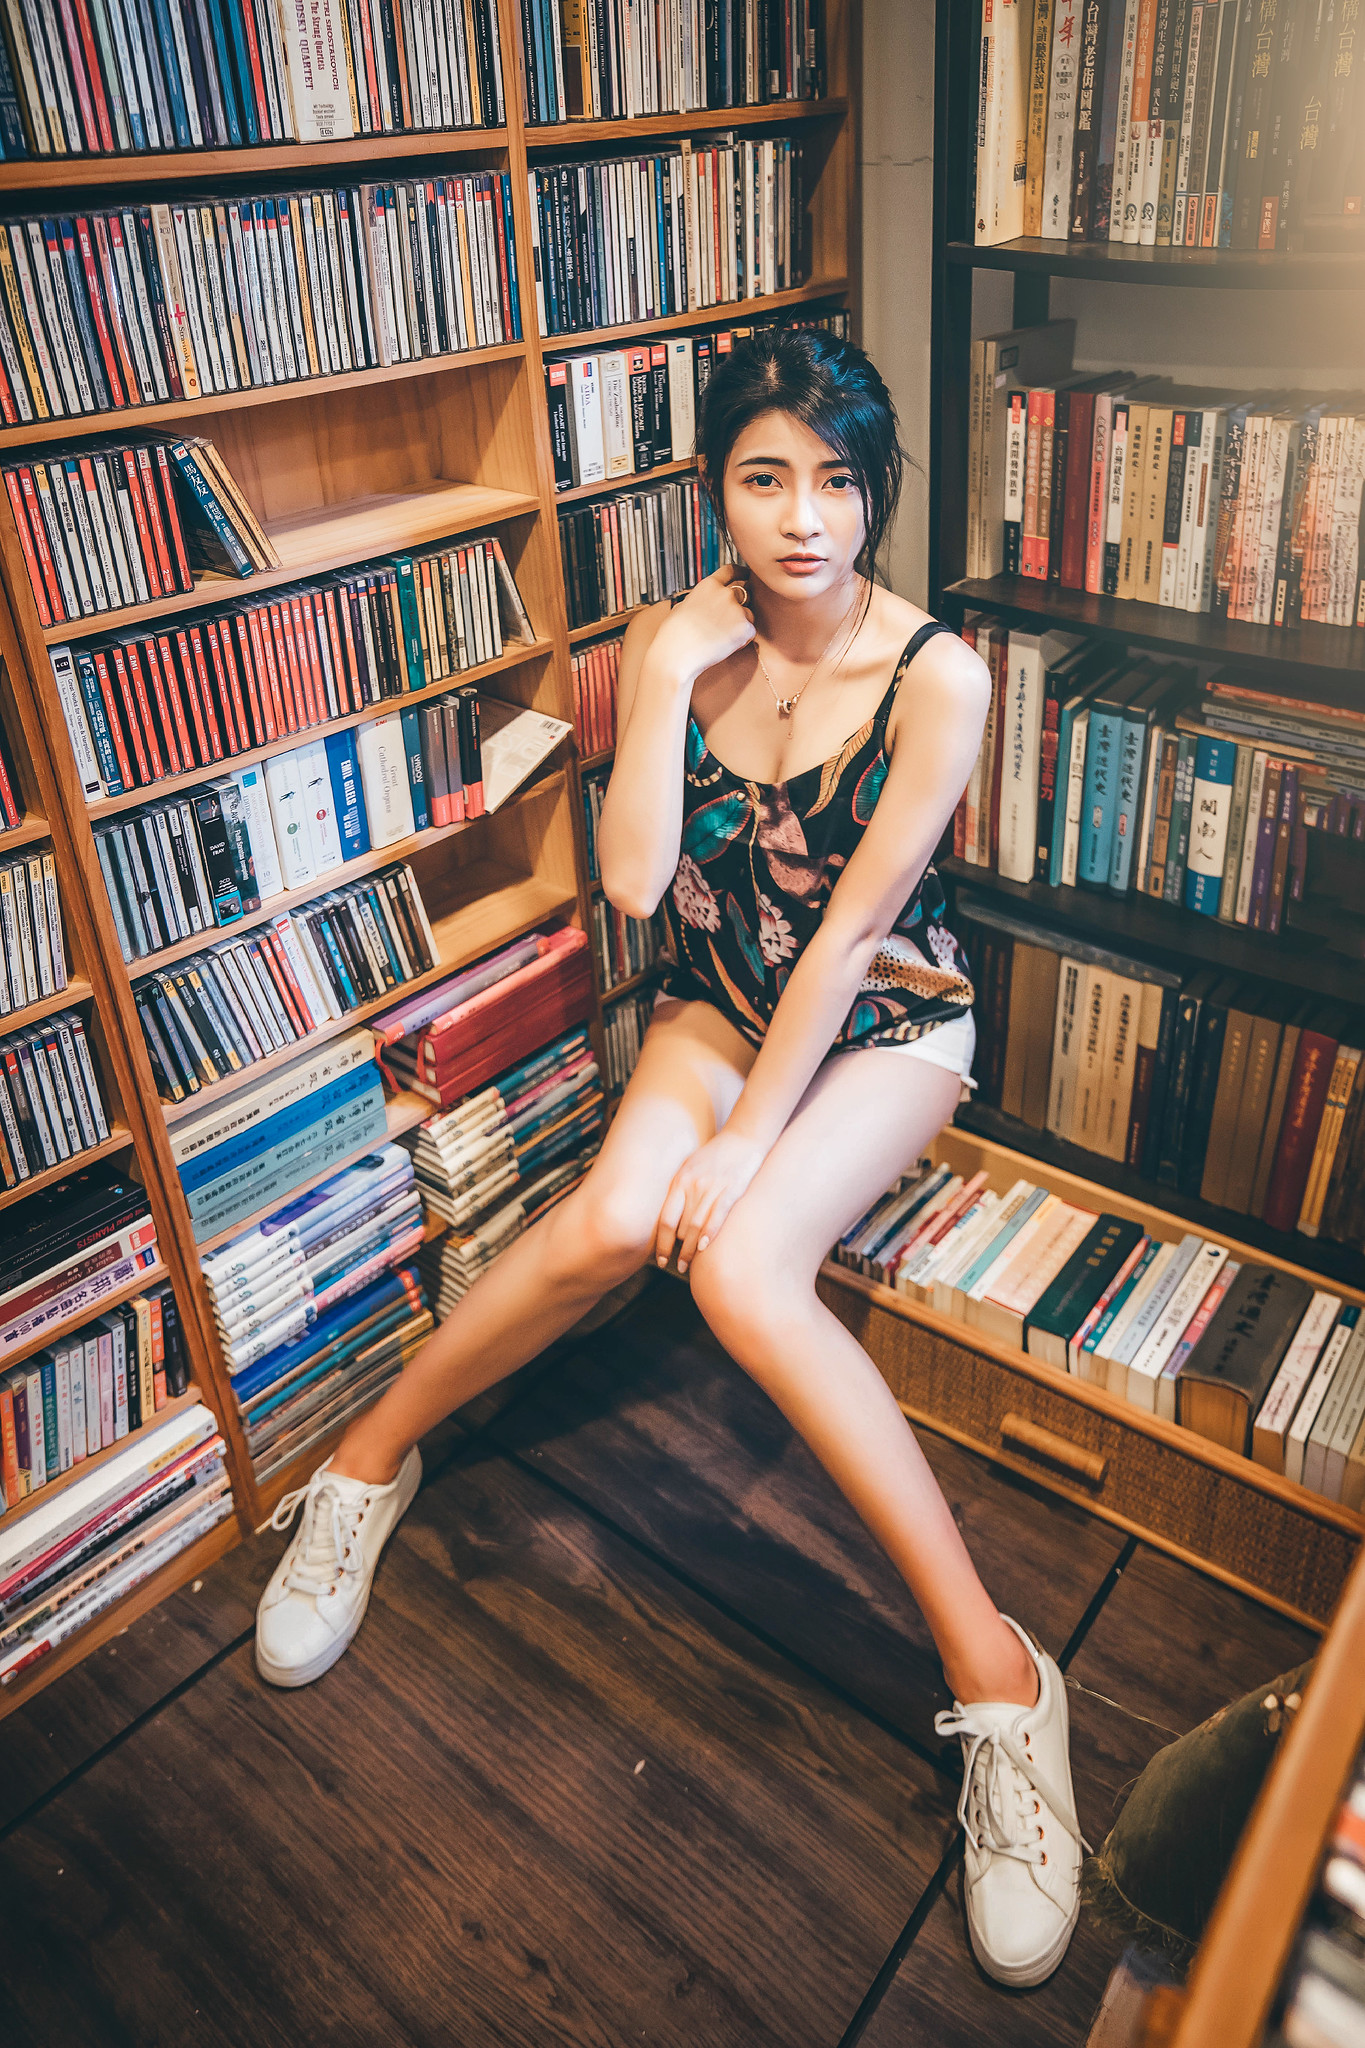 Asian Women Model Indoors Women Indoors Sitting Knees Together Looking At Viewer Books 1365x2048